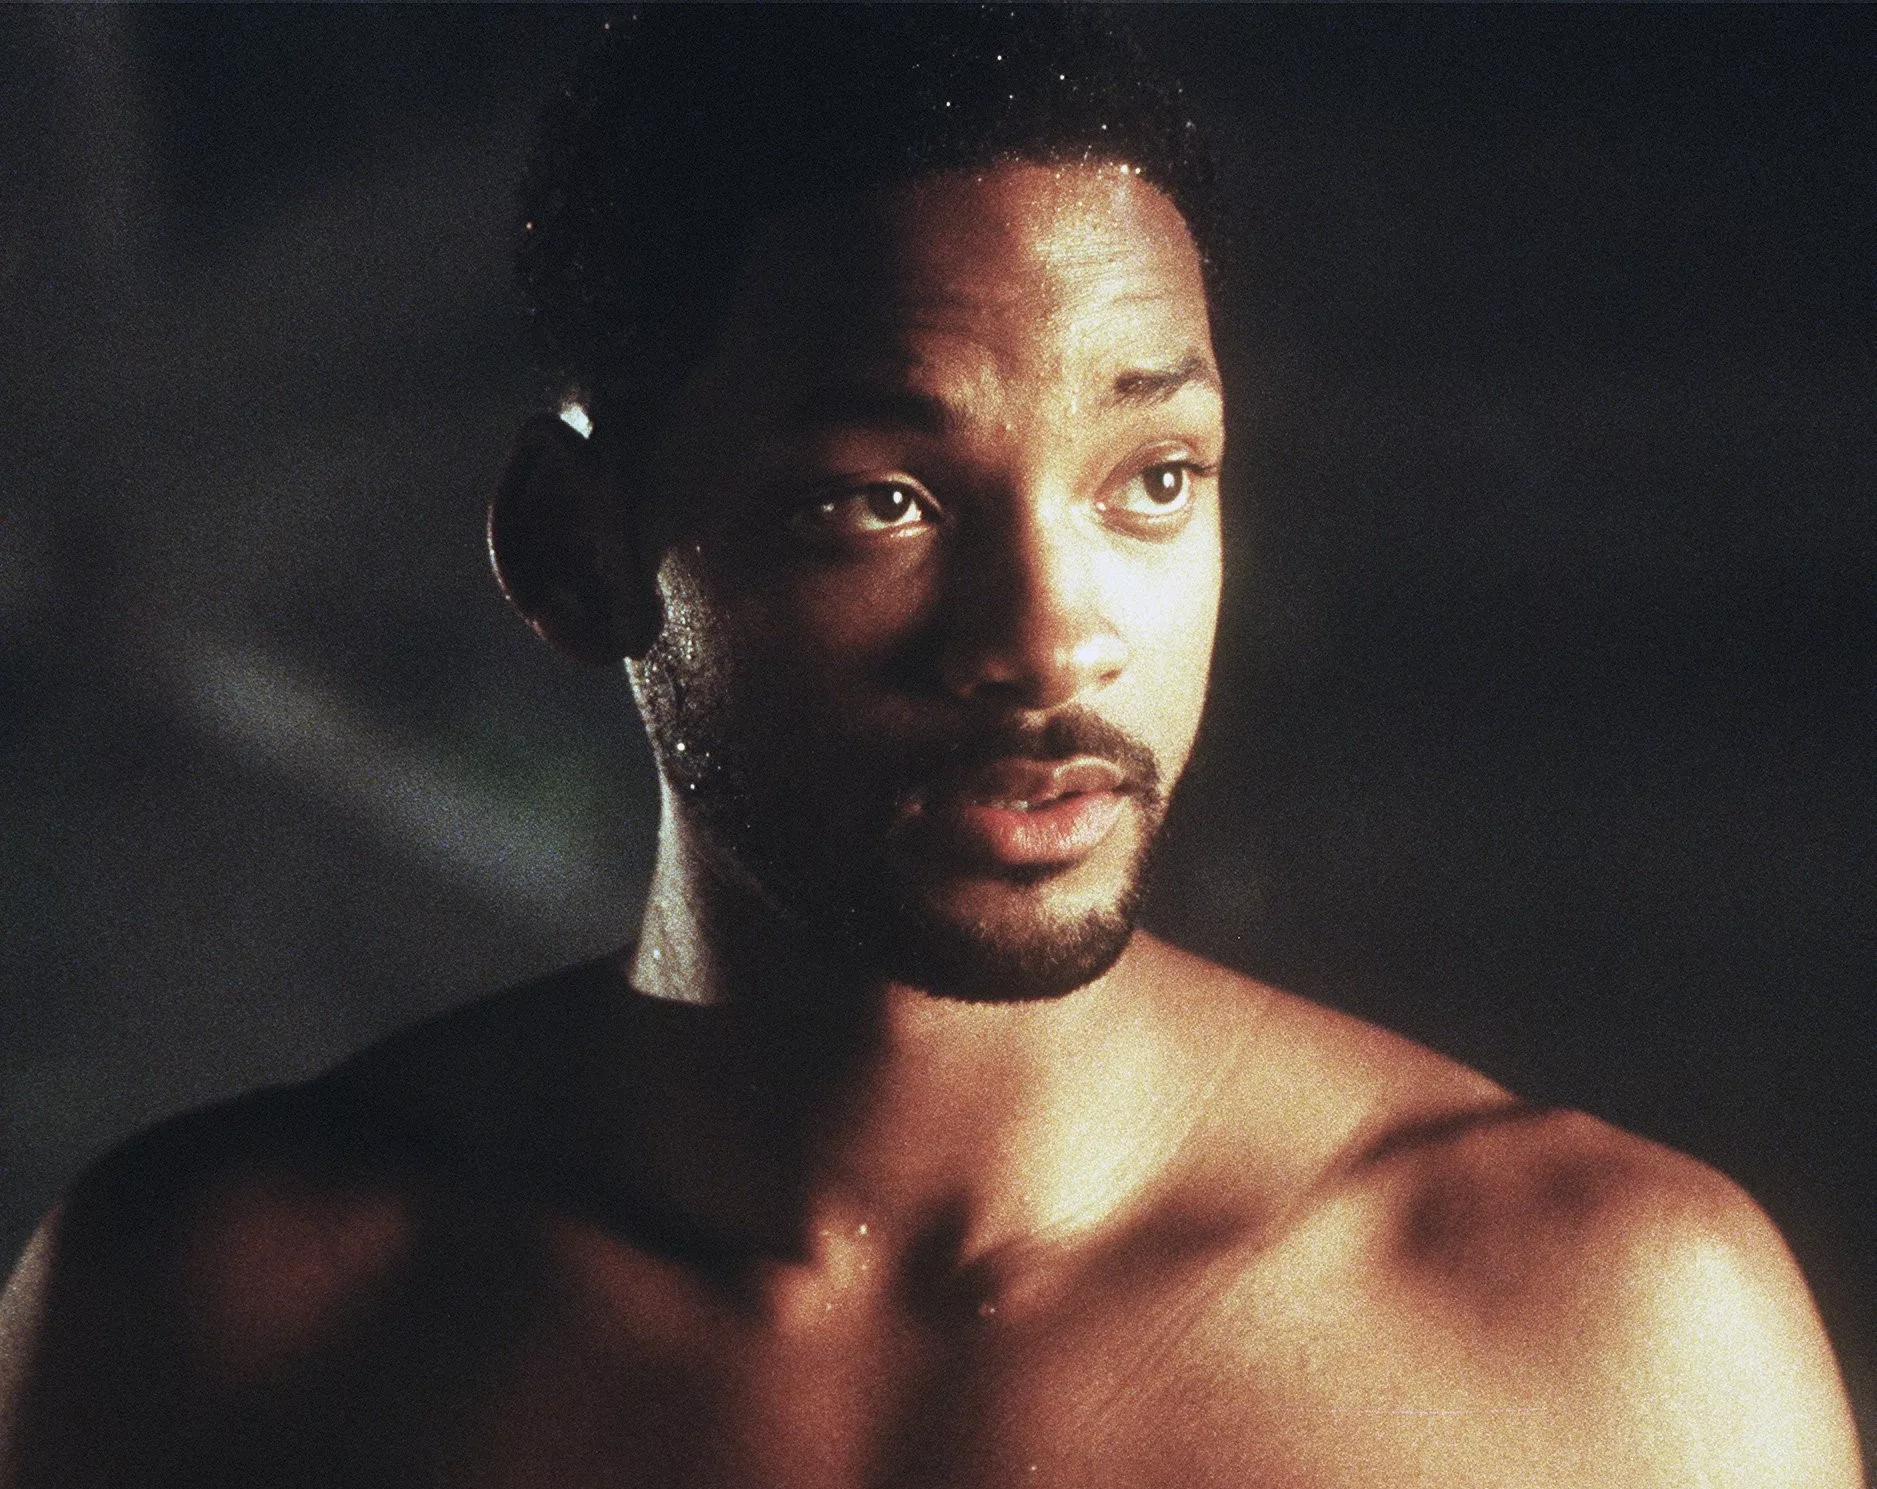 Male celeb fakes best of the net will smith american